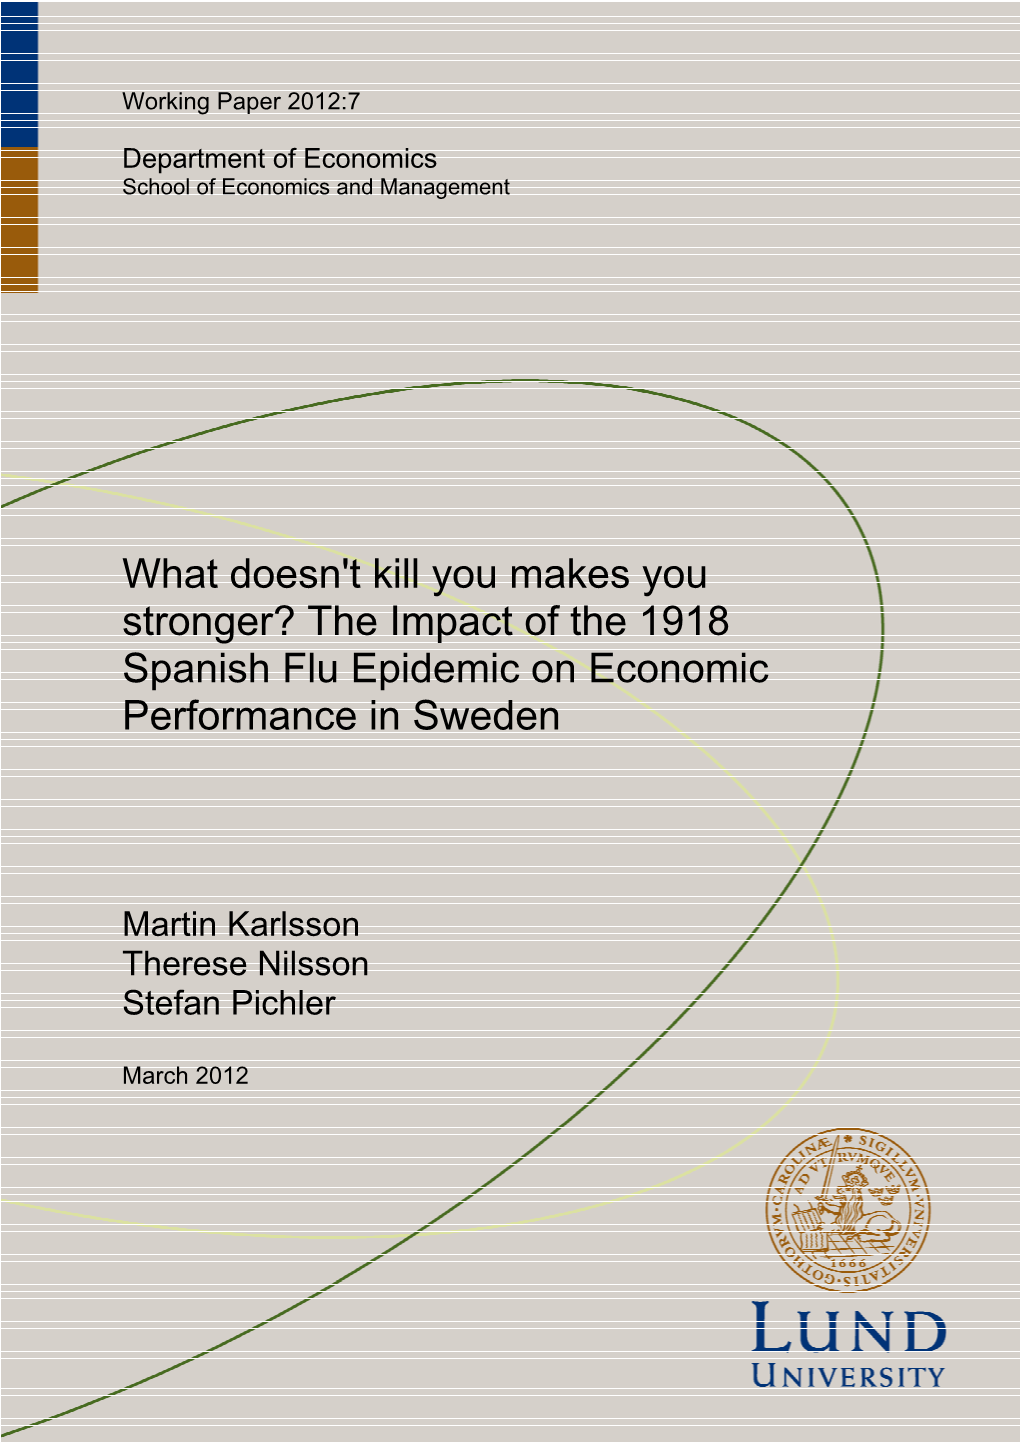 The Impact of the 1918 Spanish Flu Epidemic on Economic Performance in Sweden